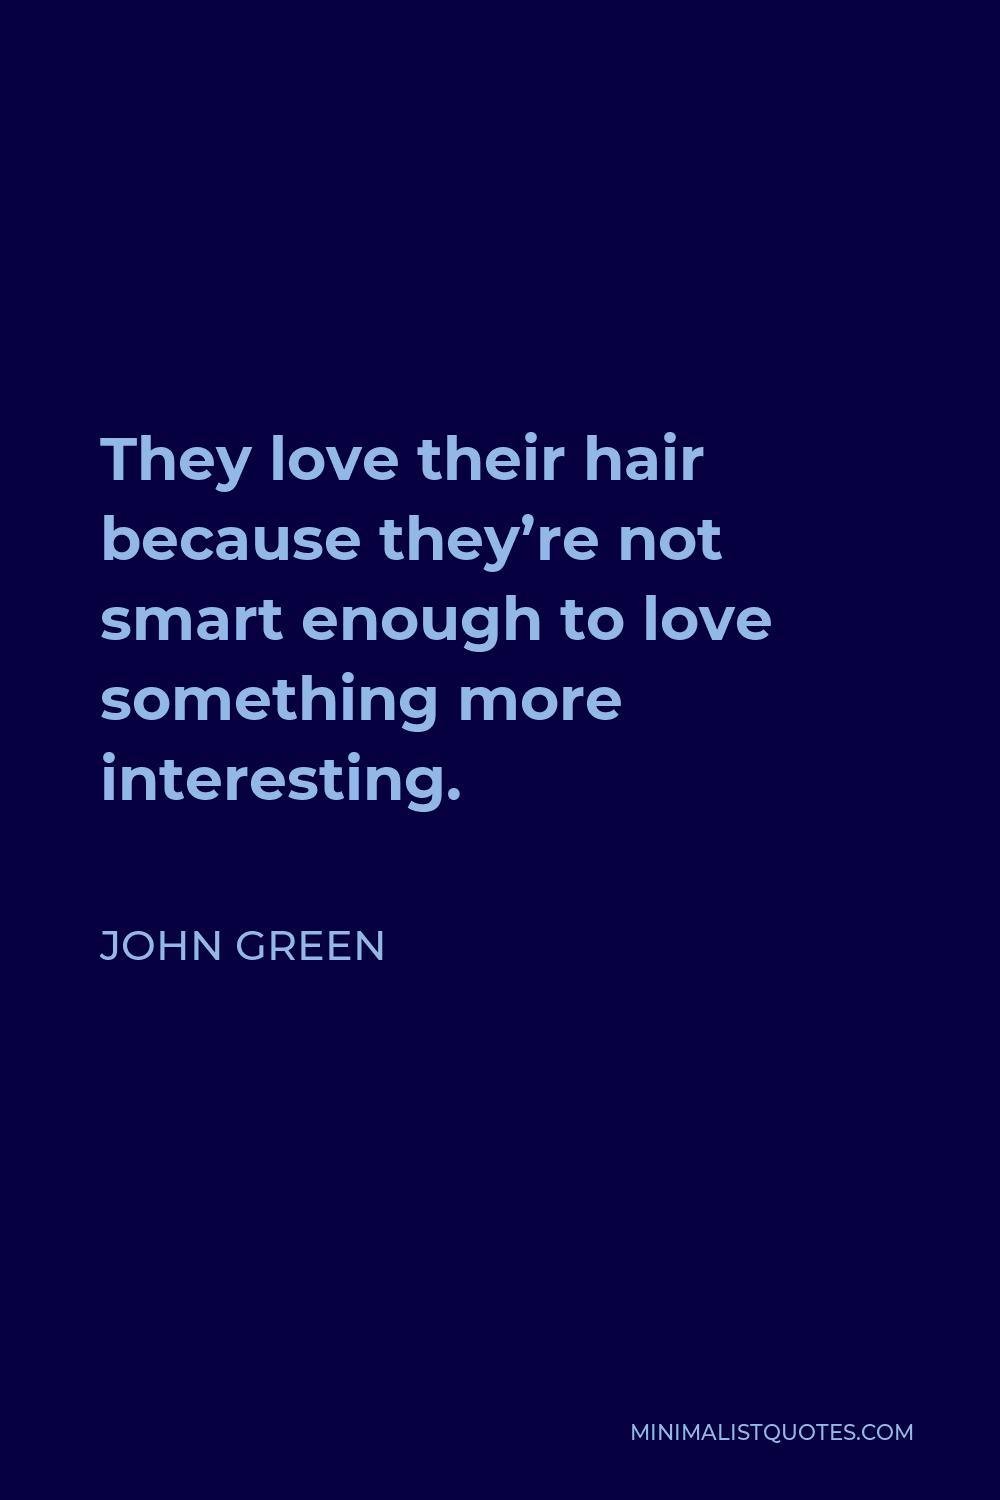 John Green Quote - They love their hair because they’re not smart enough to love something more interesting.